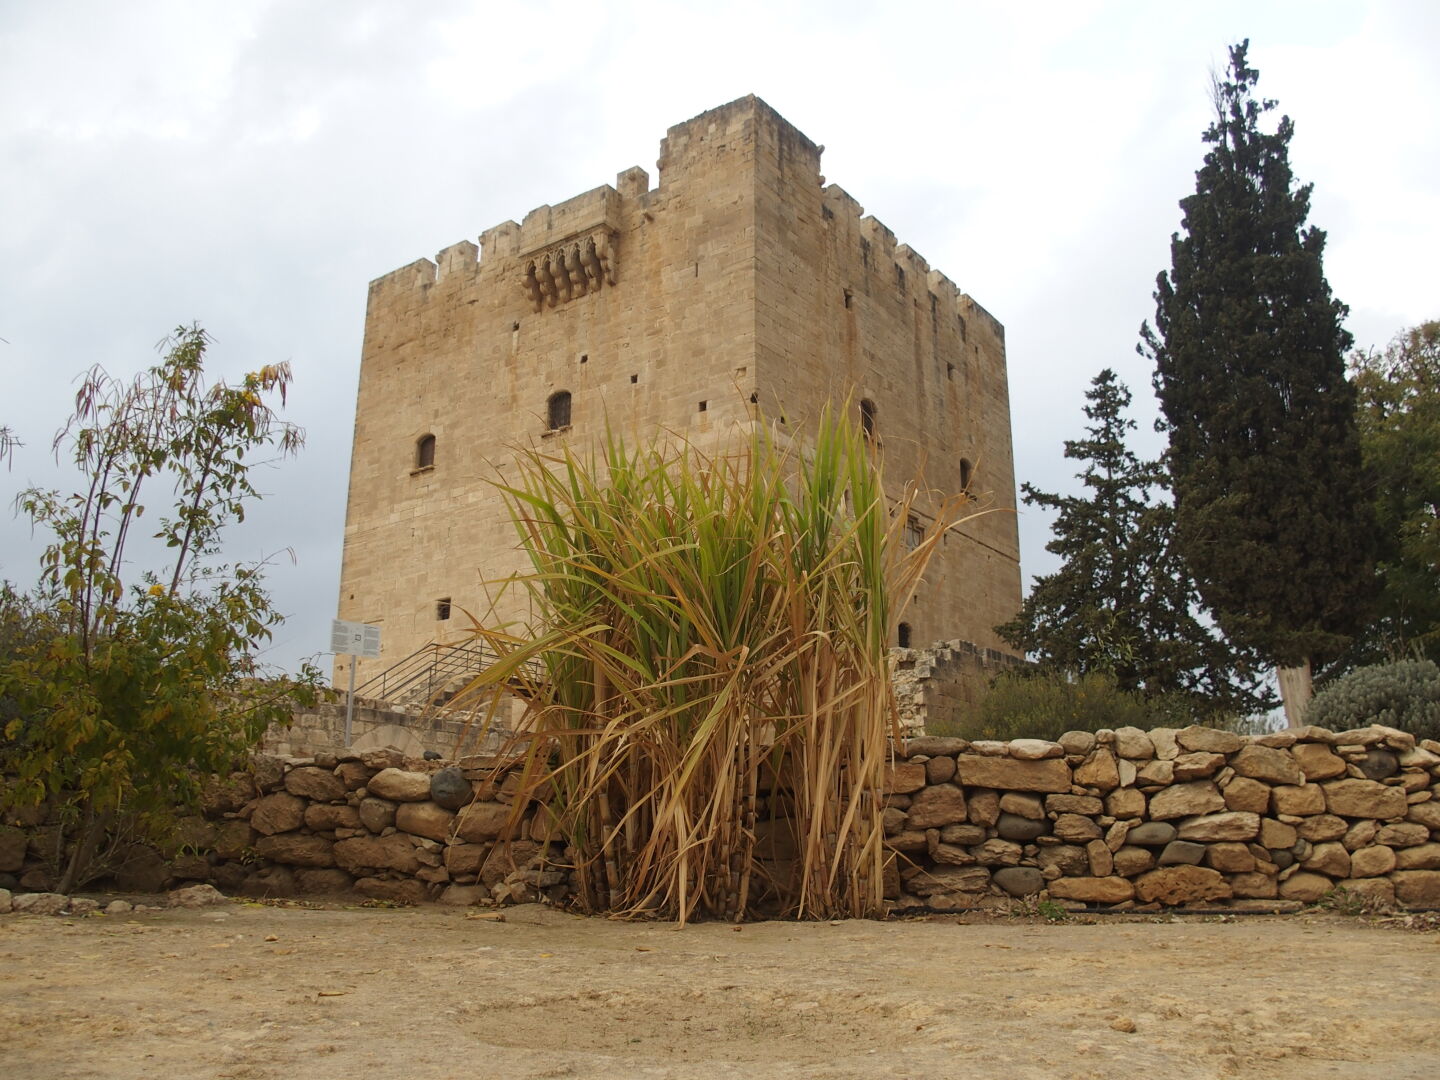 The castle Kolossi was the main command center of the rulers of Cyprus for many centuries. It controlled a valley of lush vegetation, including sugar cane, as seen here. The name &quot;Commandaria&quot; of the famous cypriot sherry wine stems from here.